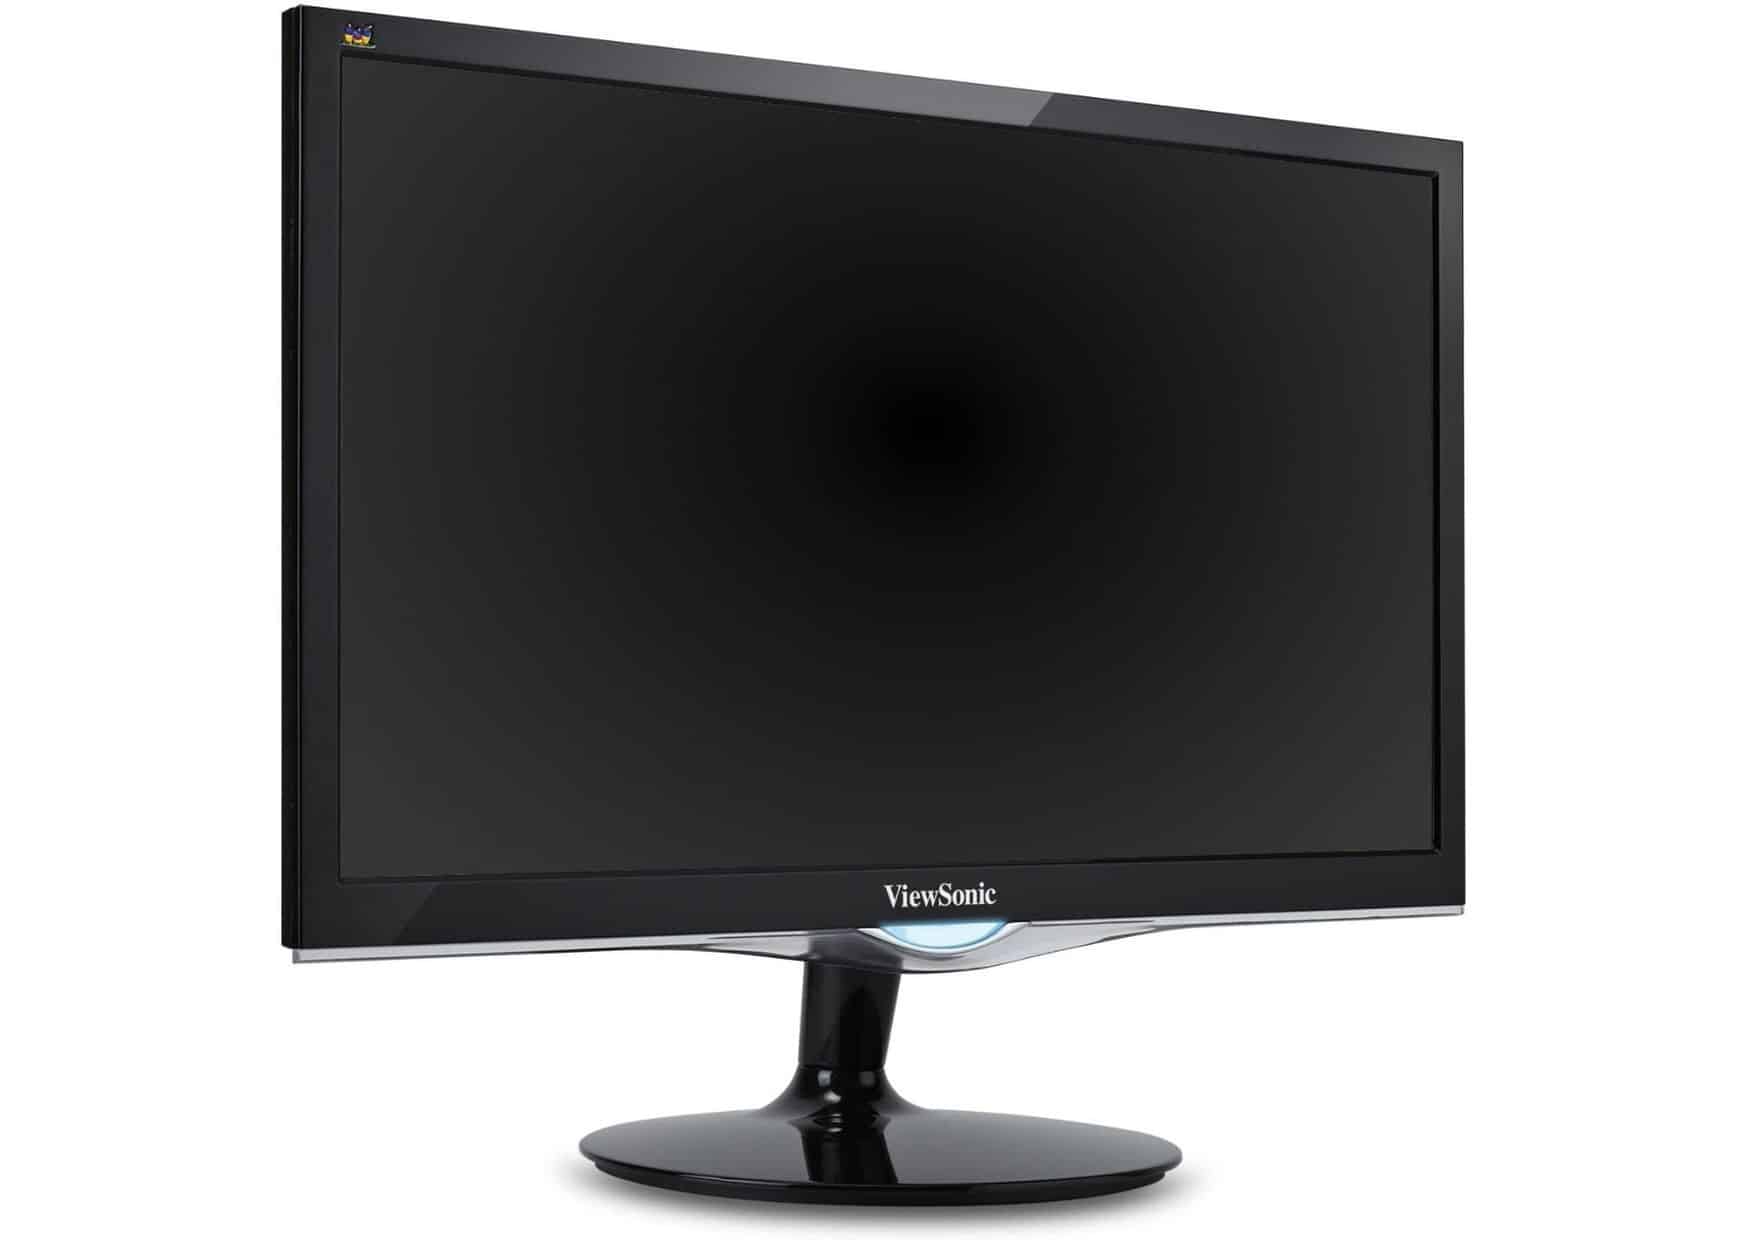 10 Best Monitors for Your PC Under $100